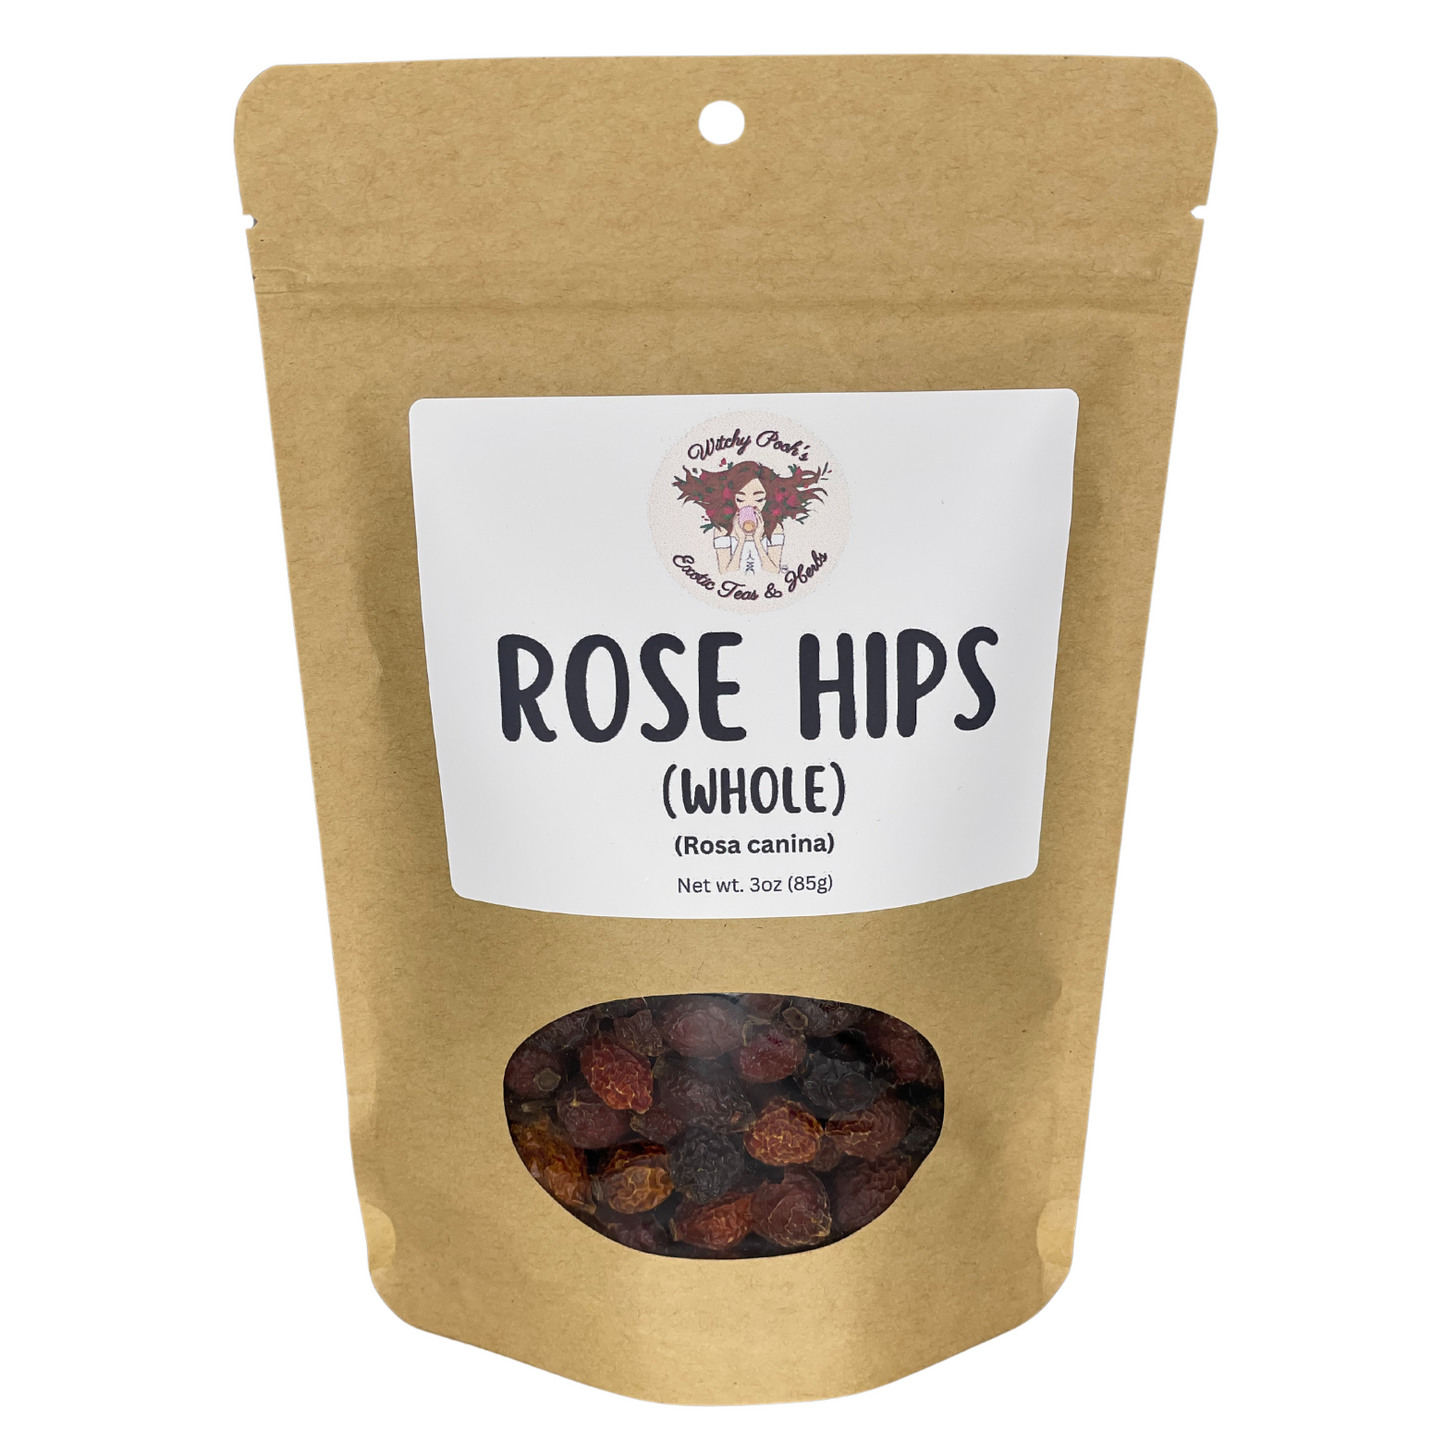 Witchy Pooh's Rose Hips Fruit Whole For Love Spells and Rituals, Simmer Pots, Tea and Cooking